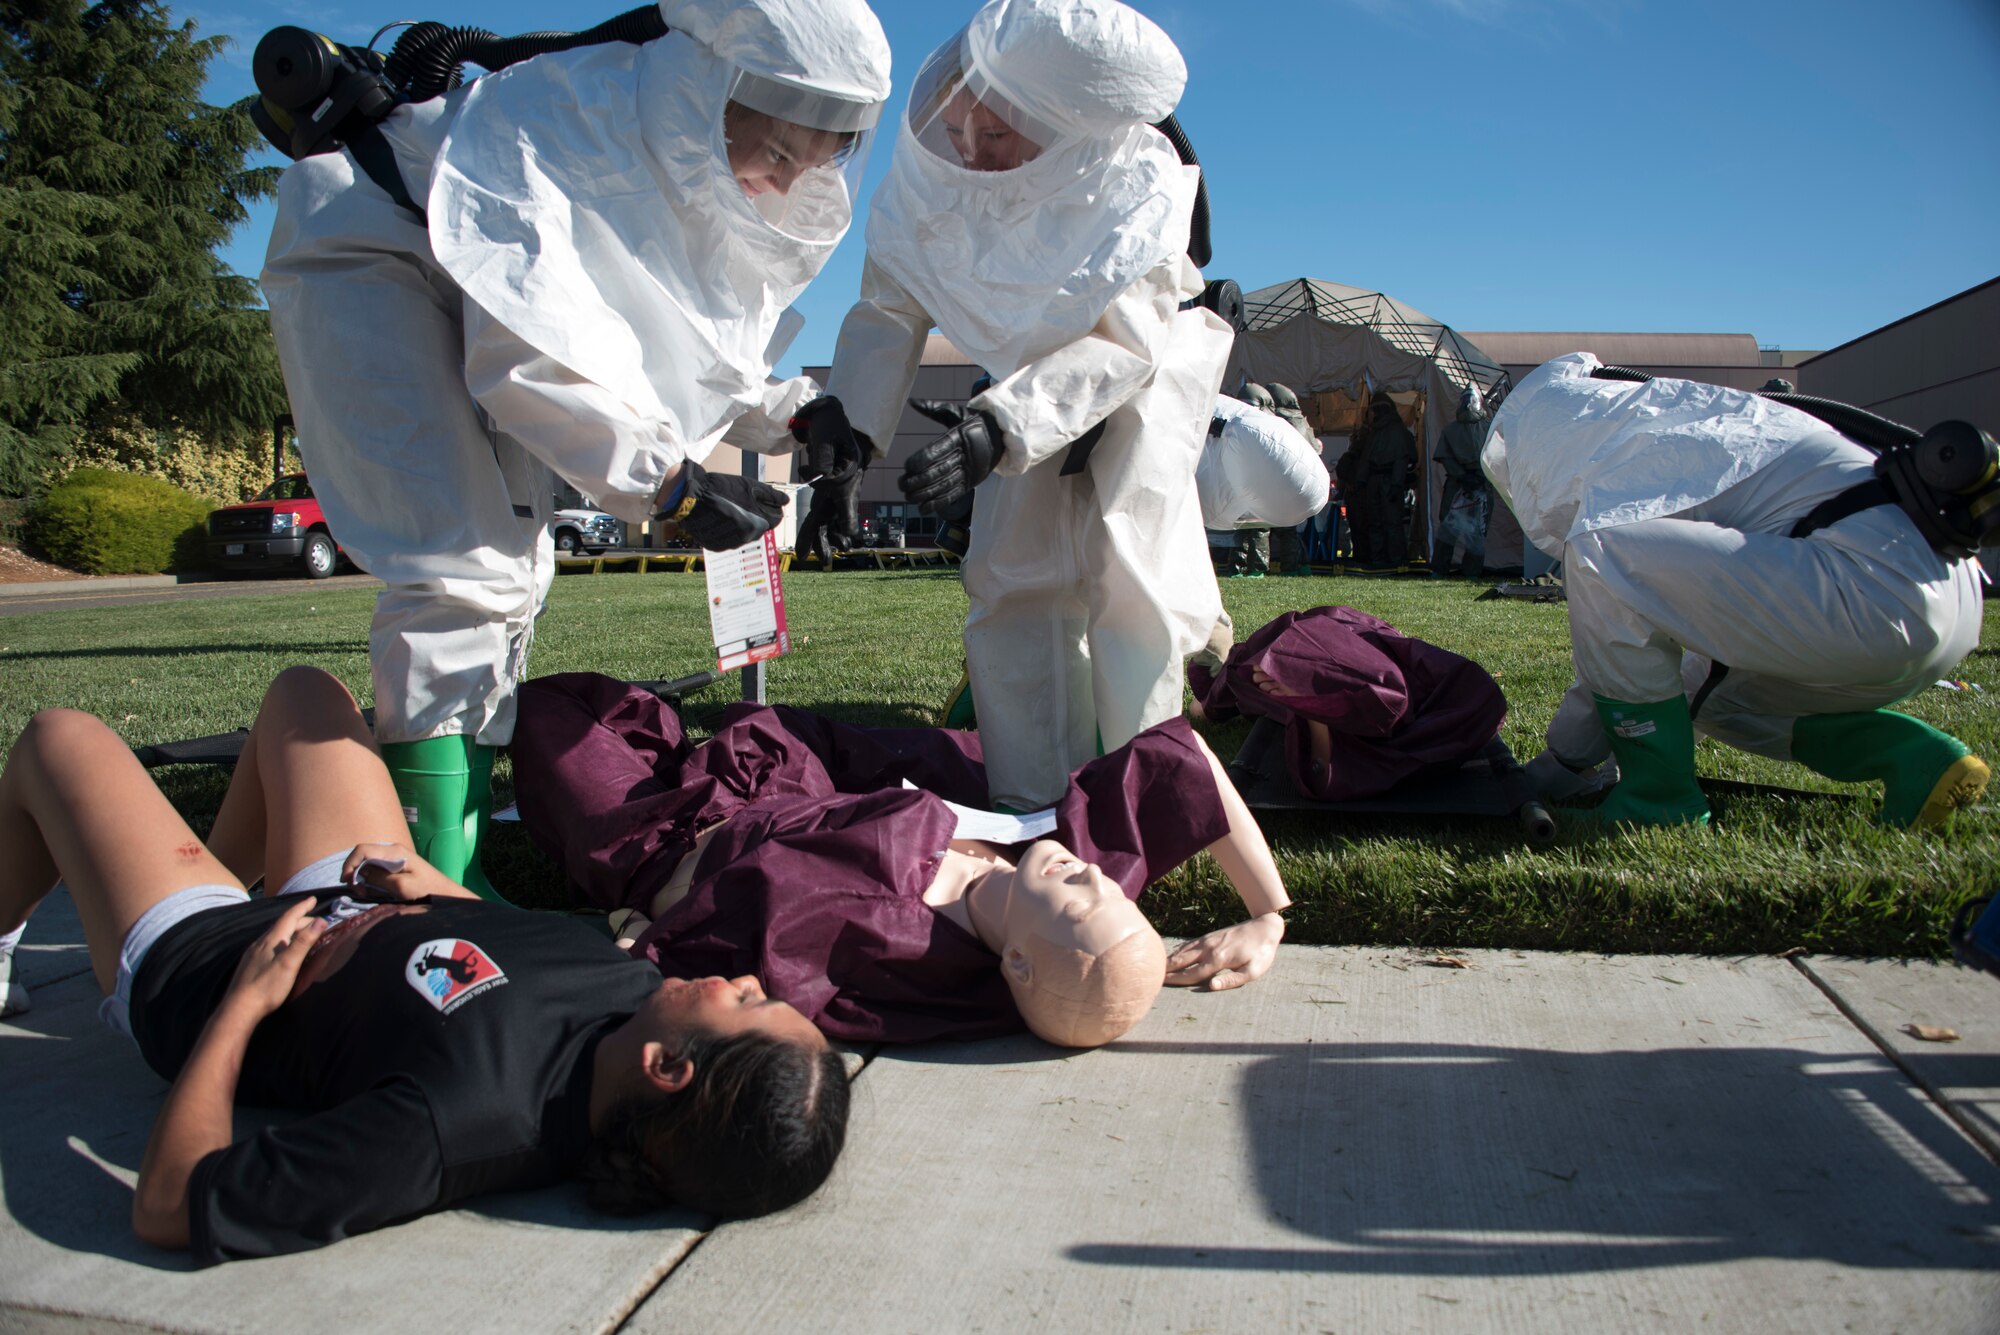 U.S. Airmen from the 60th Medical Group triage simulated patients June 27, 2019, at Travis Air Force Base, California. The Airmen and patients were part of a hazardous material exercise at David Grant USAF Medical Center. (U.S. Air Force photo by Staff Sgt. Amber Carter)